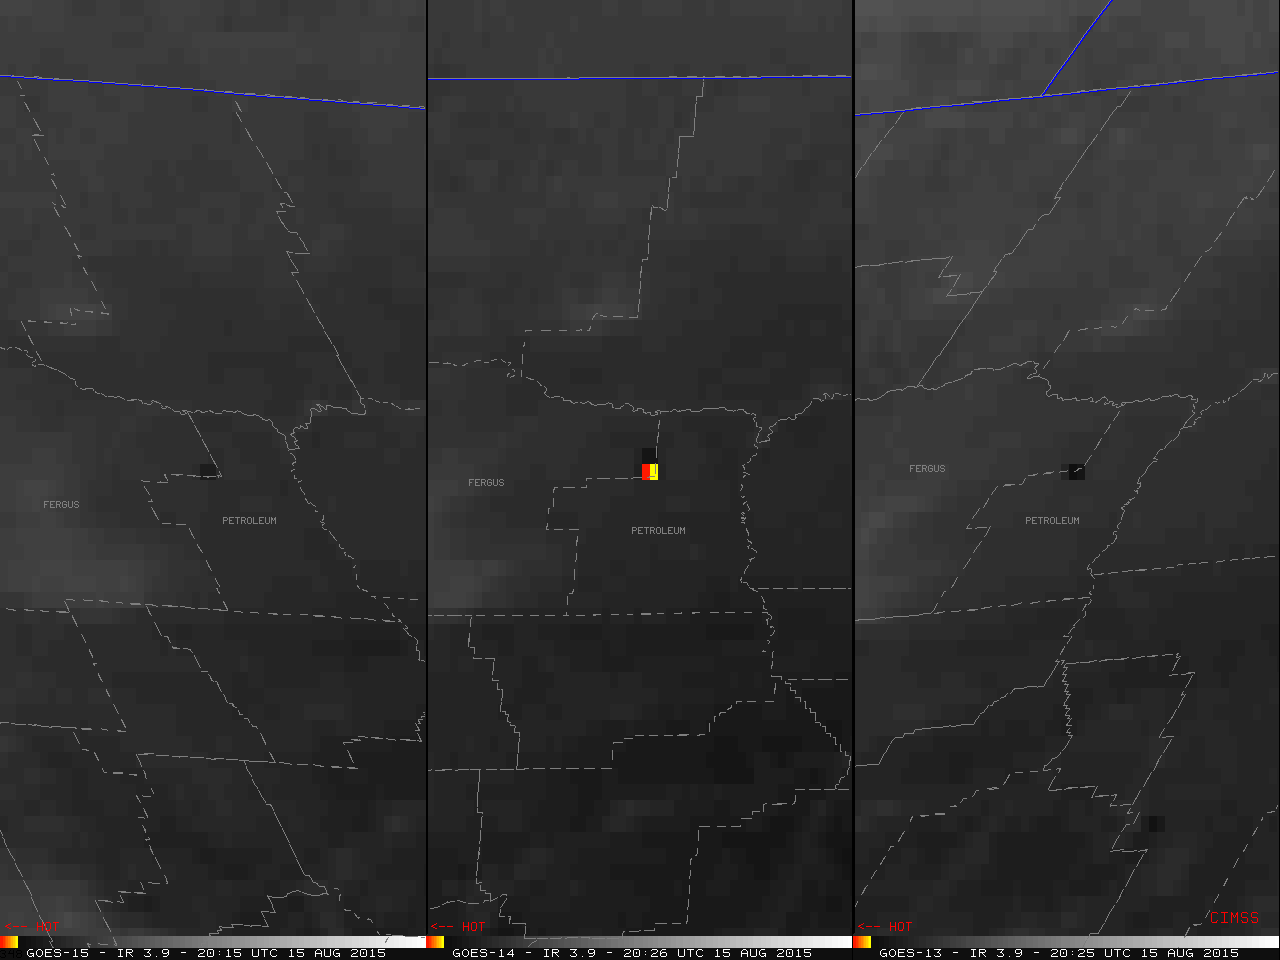 GOES-15 (left), GOES-14 (center), and GOES-13 (right) 3.9 µm shortwave IR images [click to play MP4 animation]